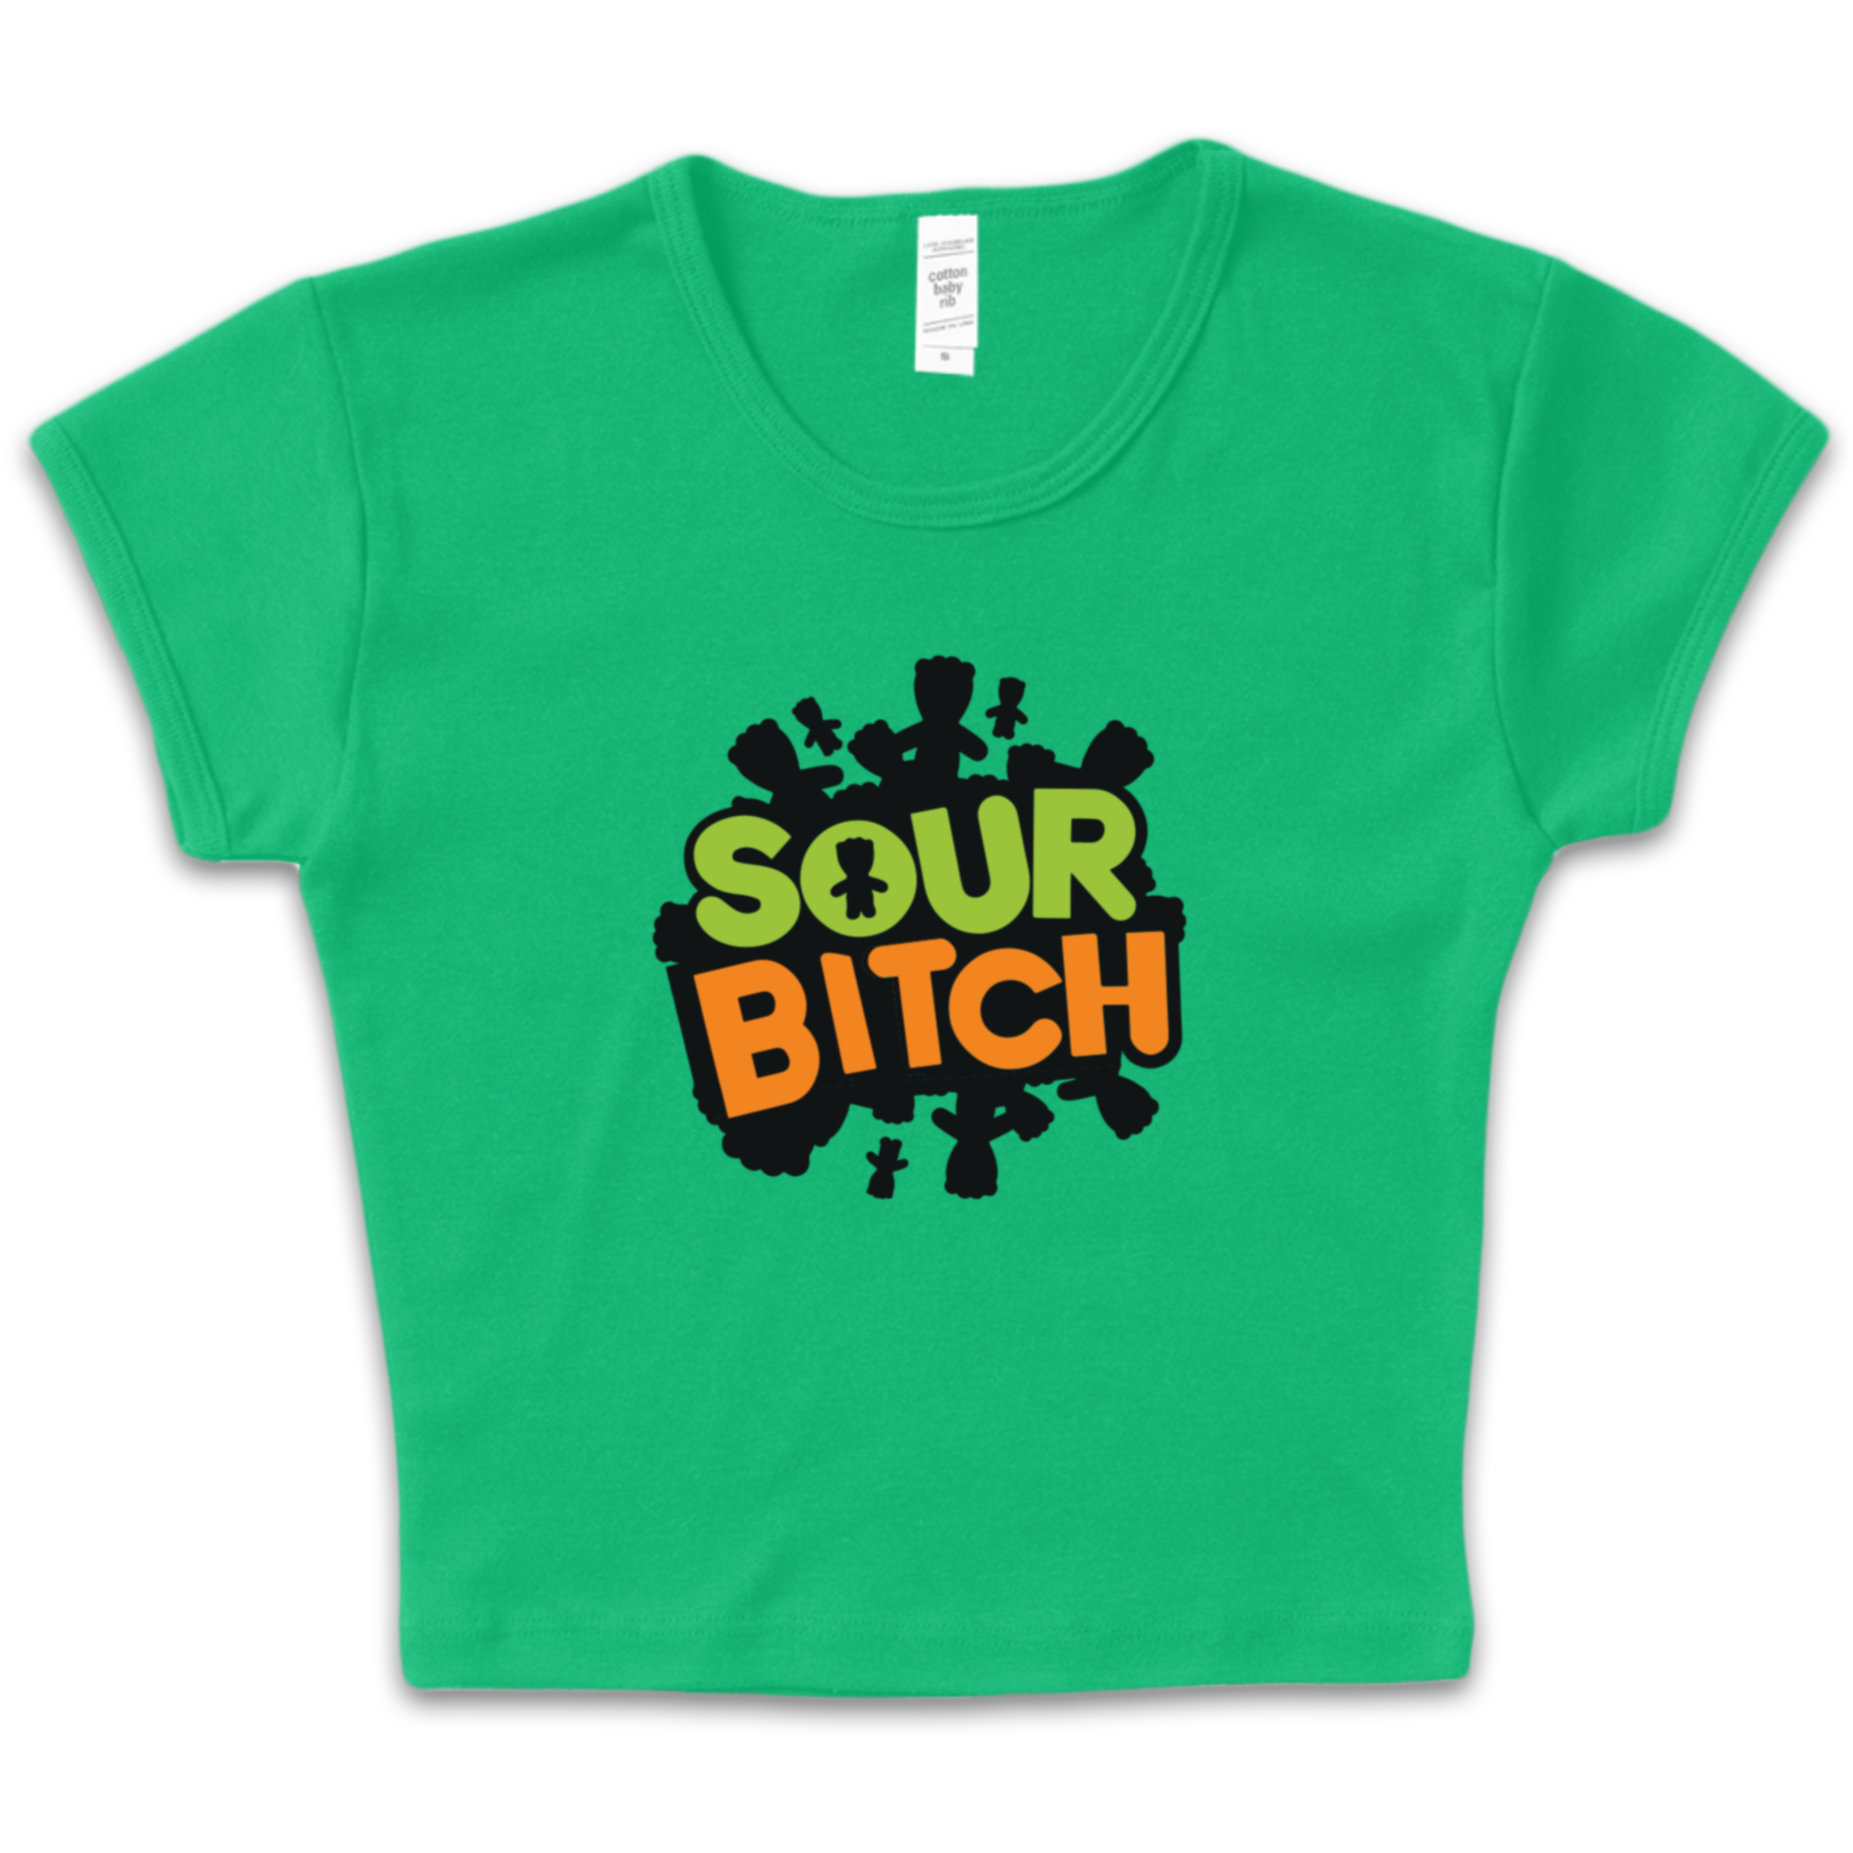 Sour Bitch Baby Tee